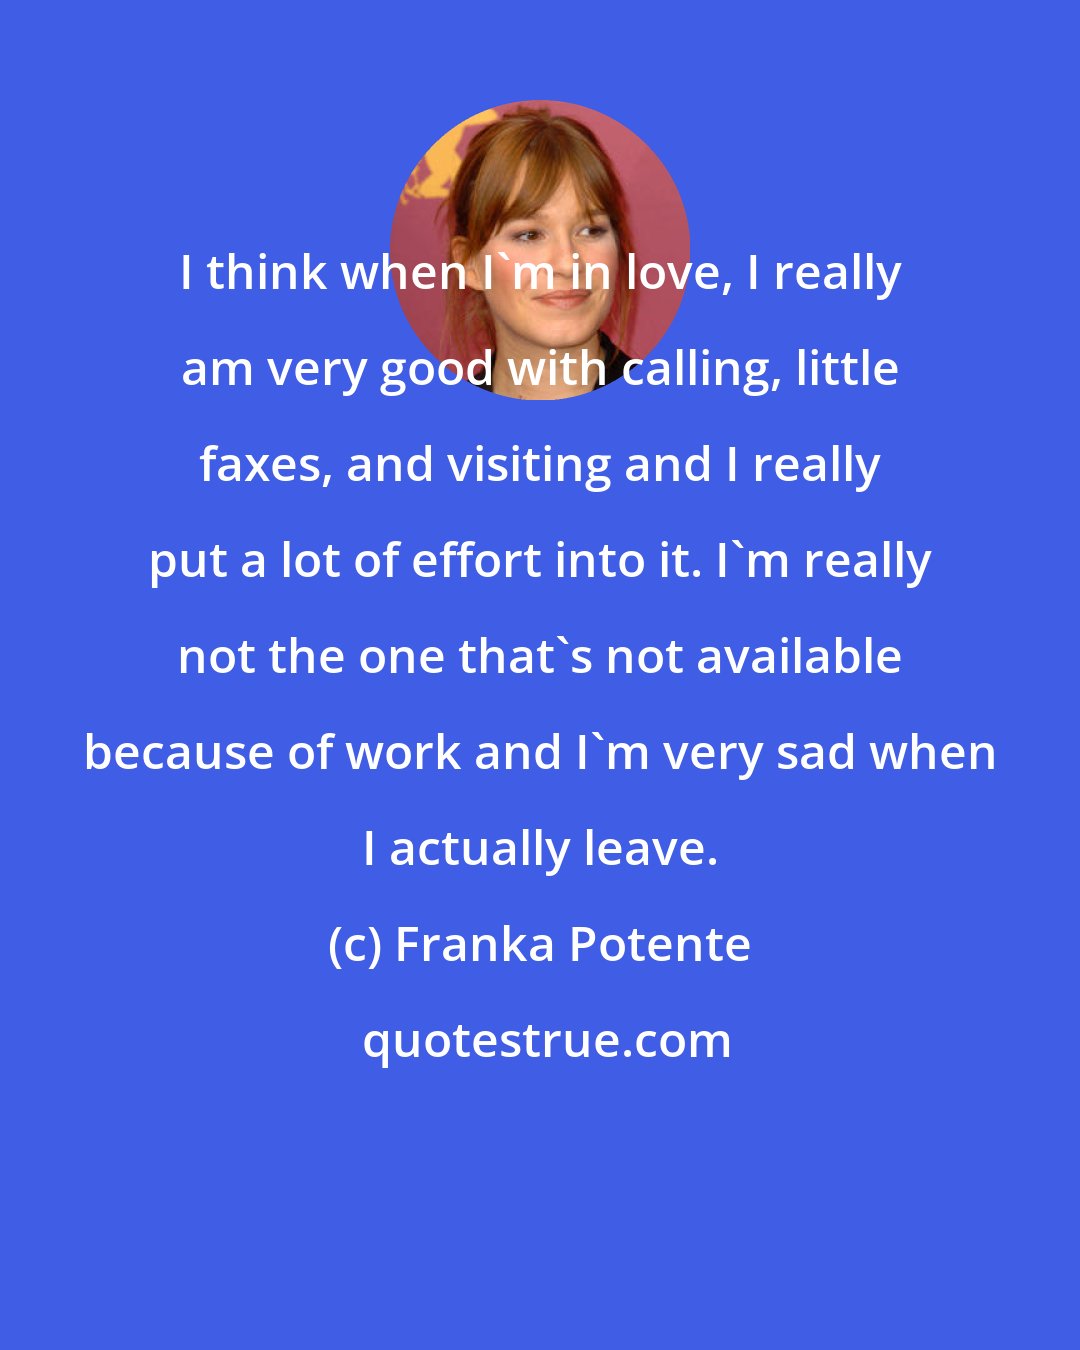 Franka Potente: I think when I'm in love, I really am very good with calling, little faxes, and visiting and I really put a lot of effort into it. I'm really not the one that's not available because of work and I'm very sad when I actually leave.